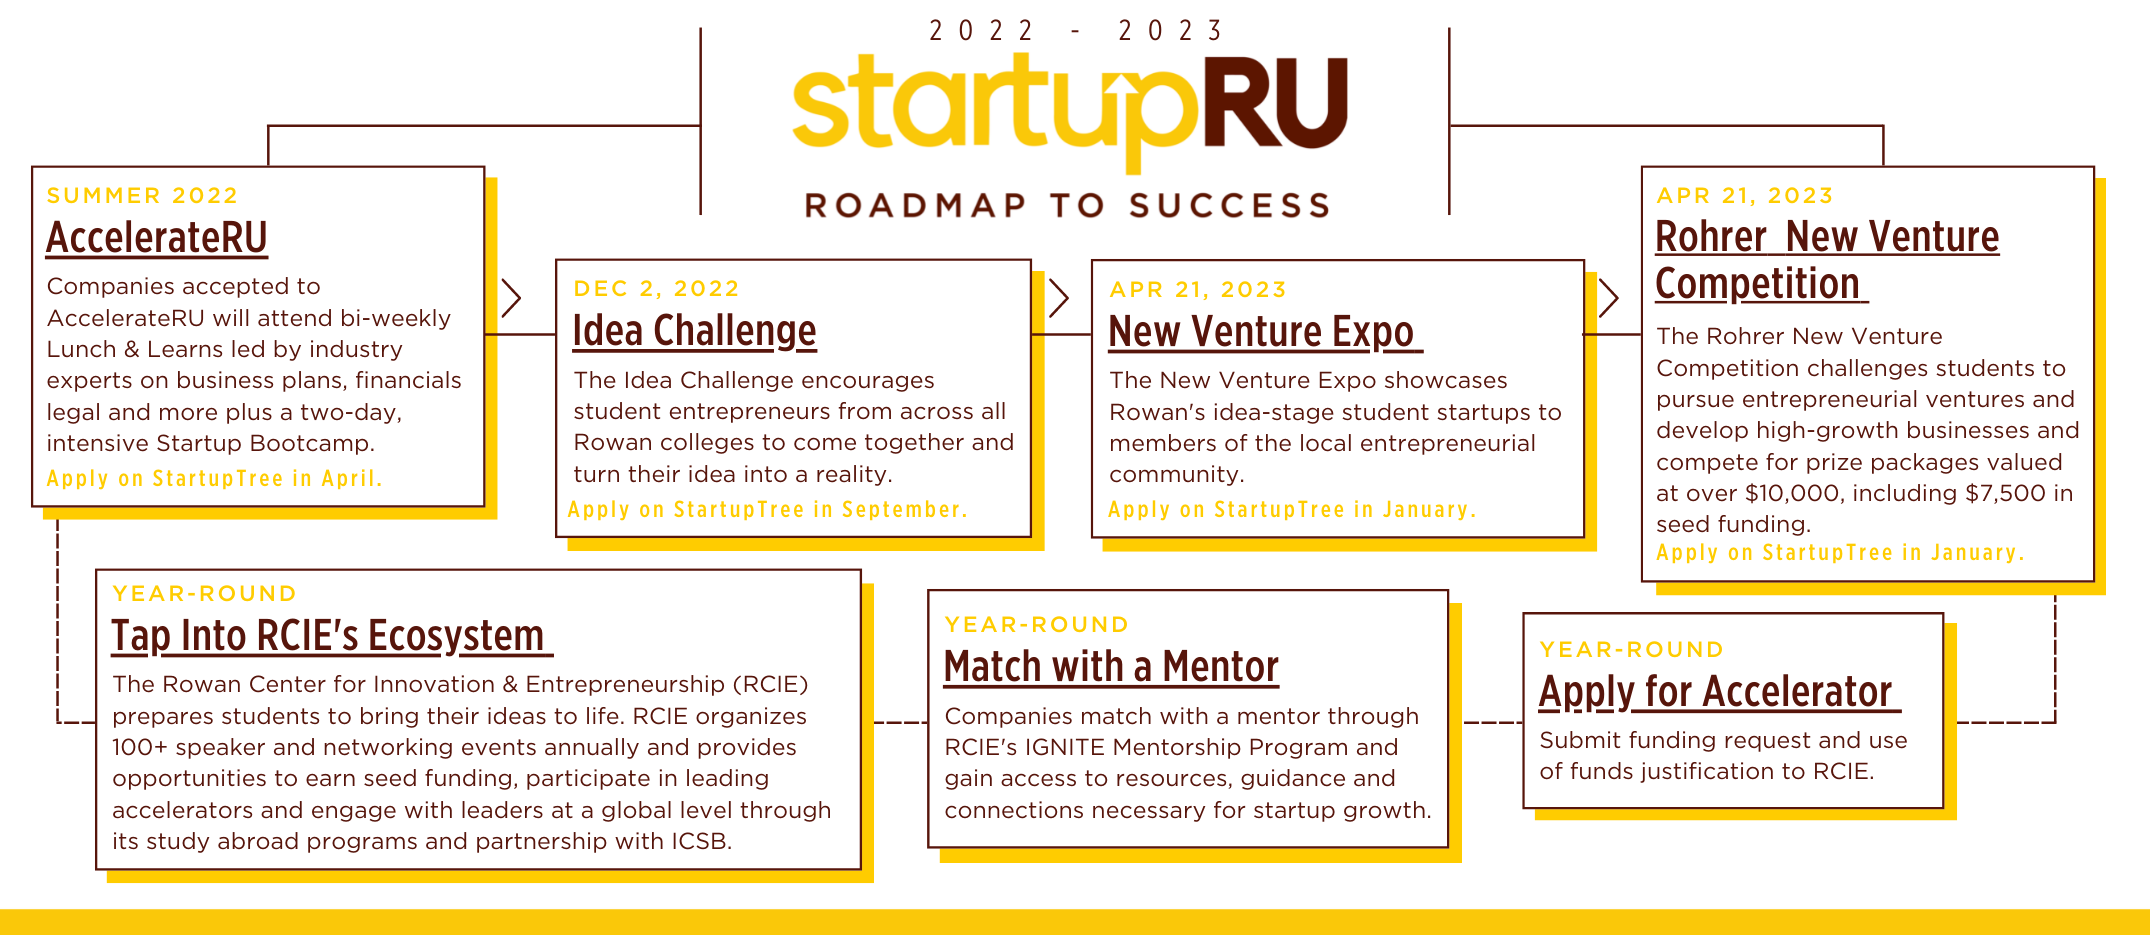 Image shows StartupRU's pipeline to success